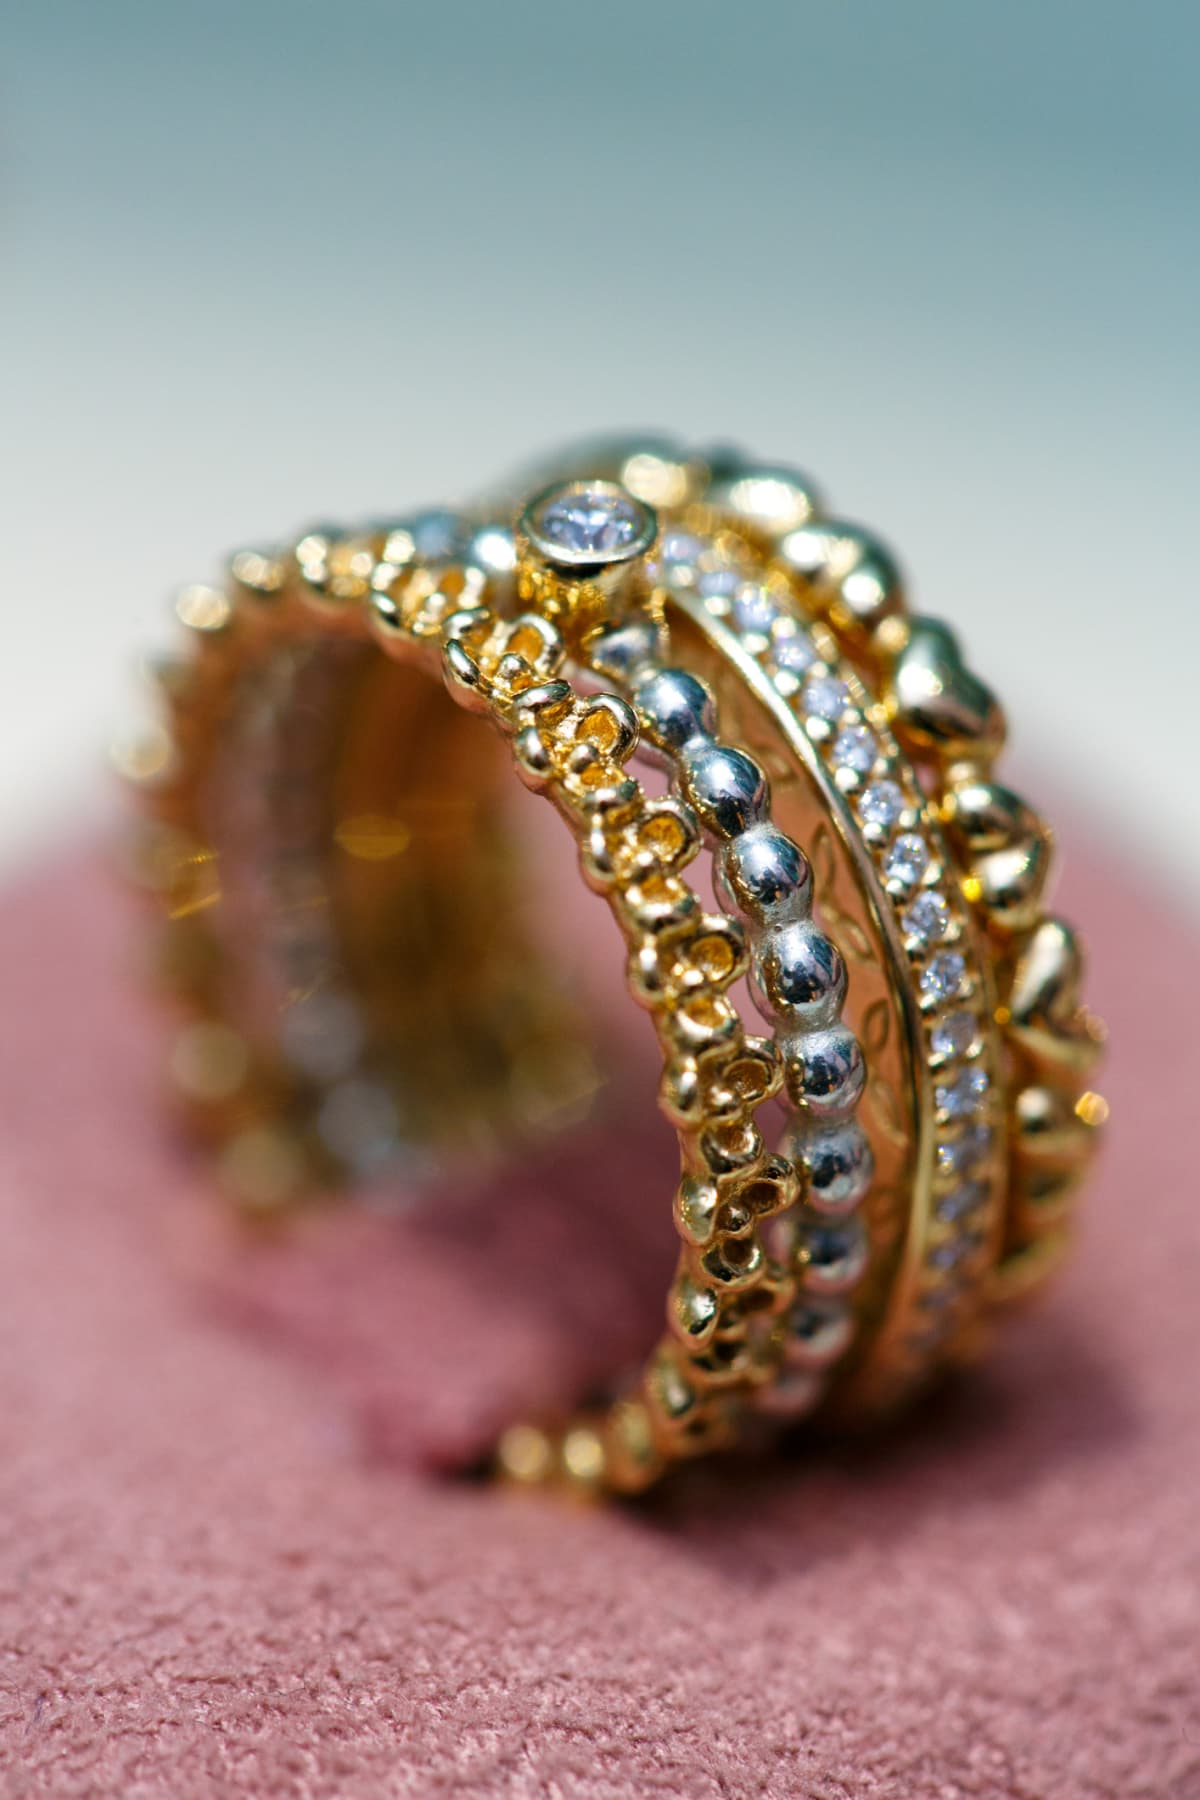 Stack of four dainty rings in gold and silver